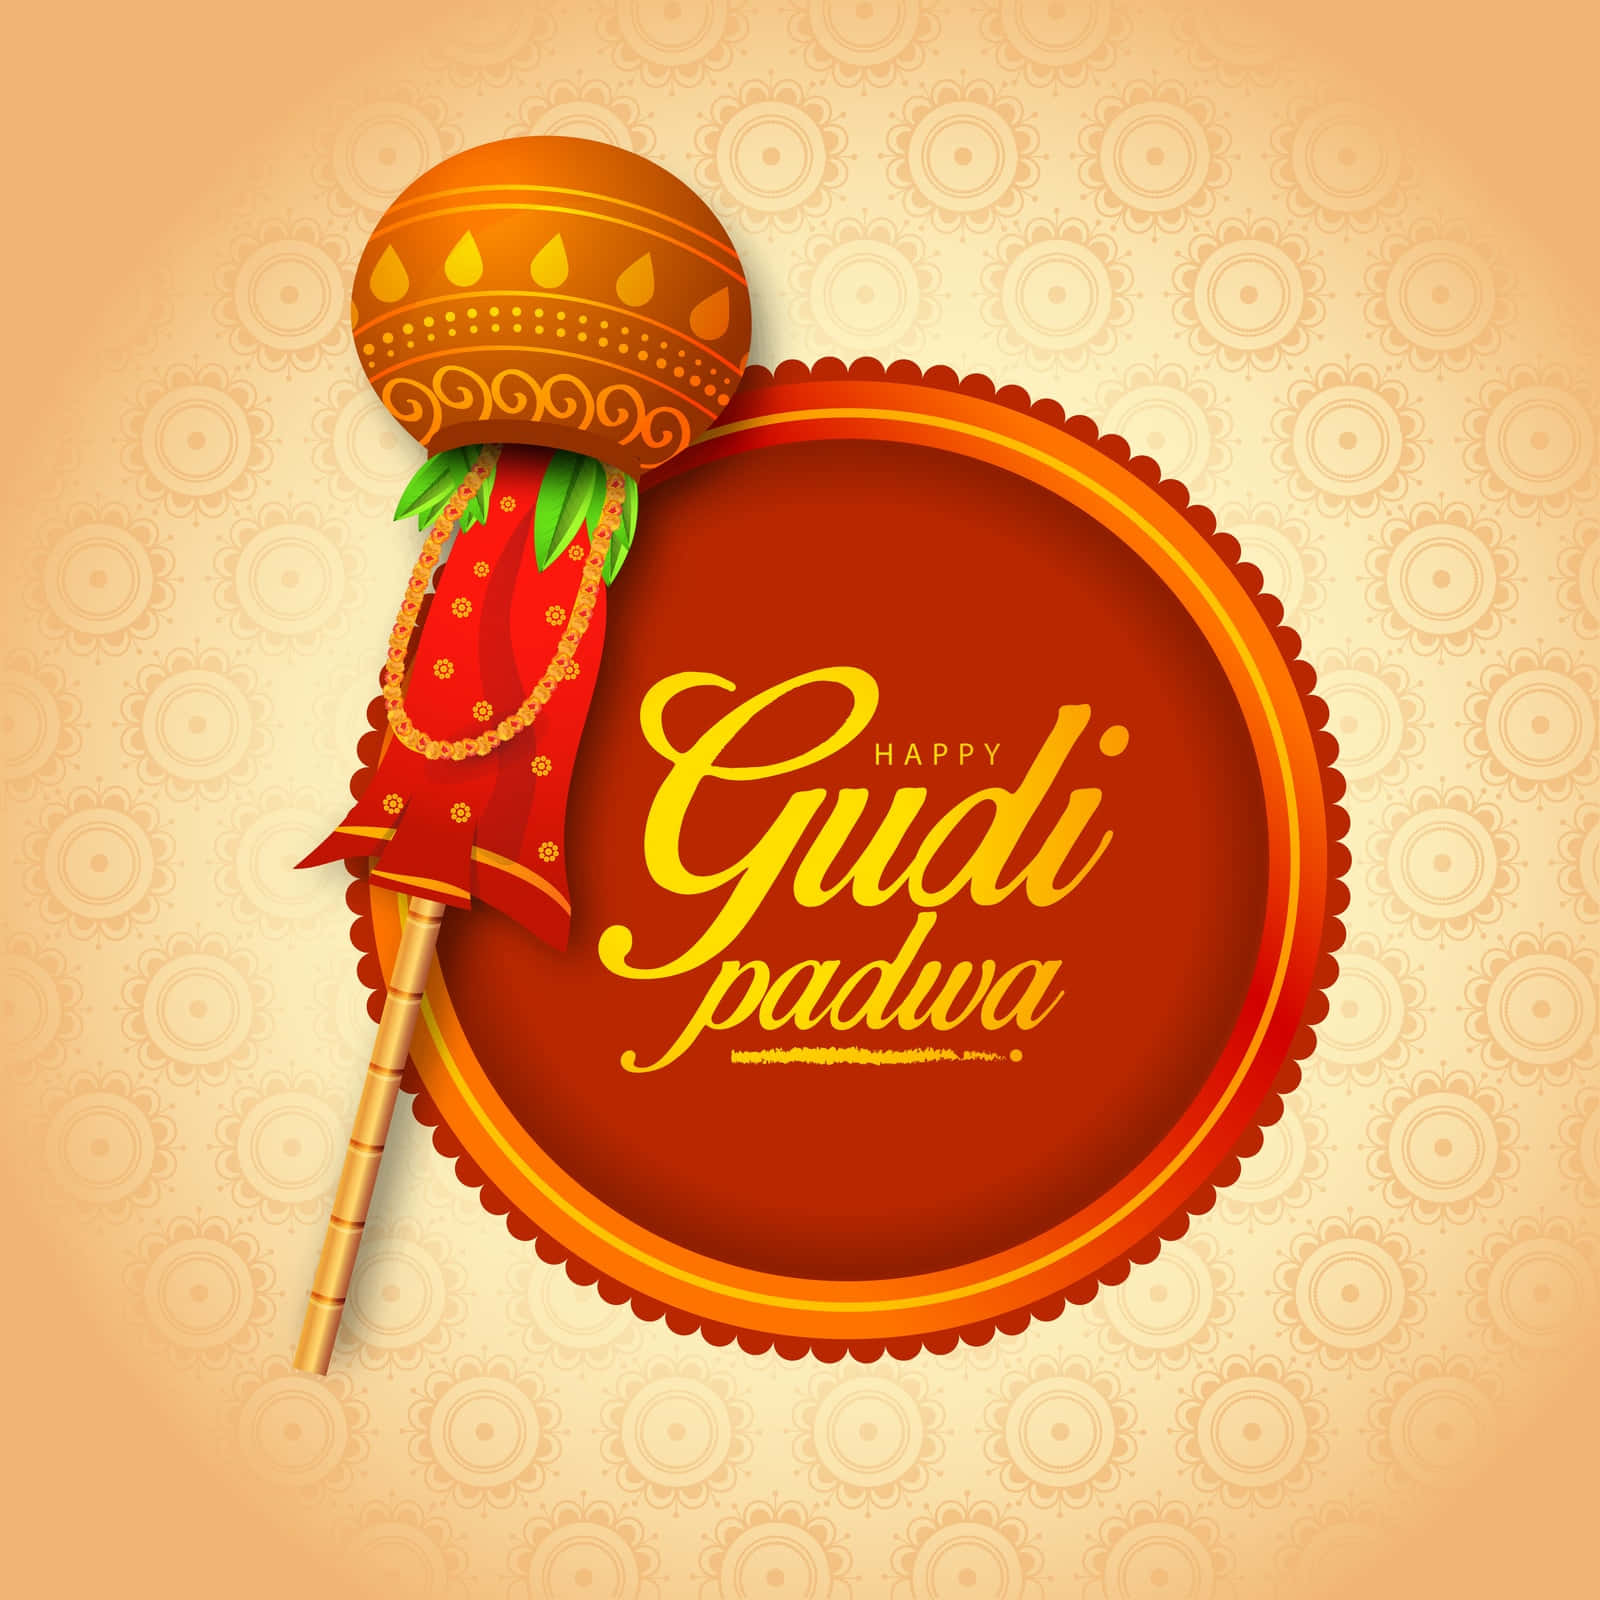 Happy Guddu Padva With A Colorful Background